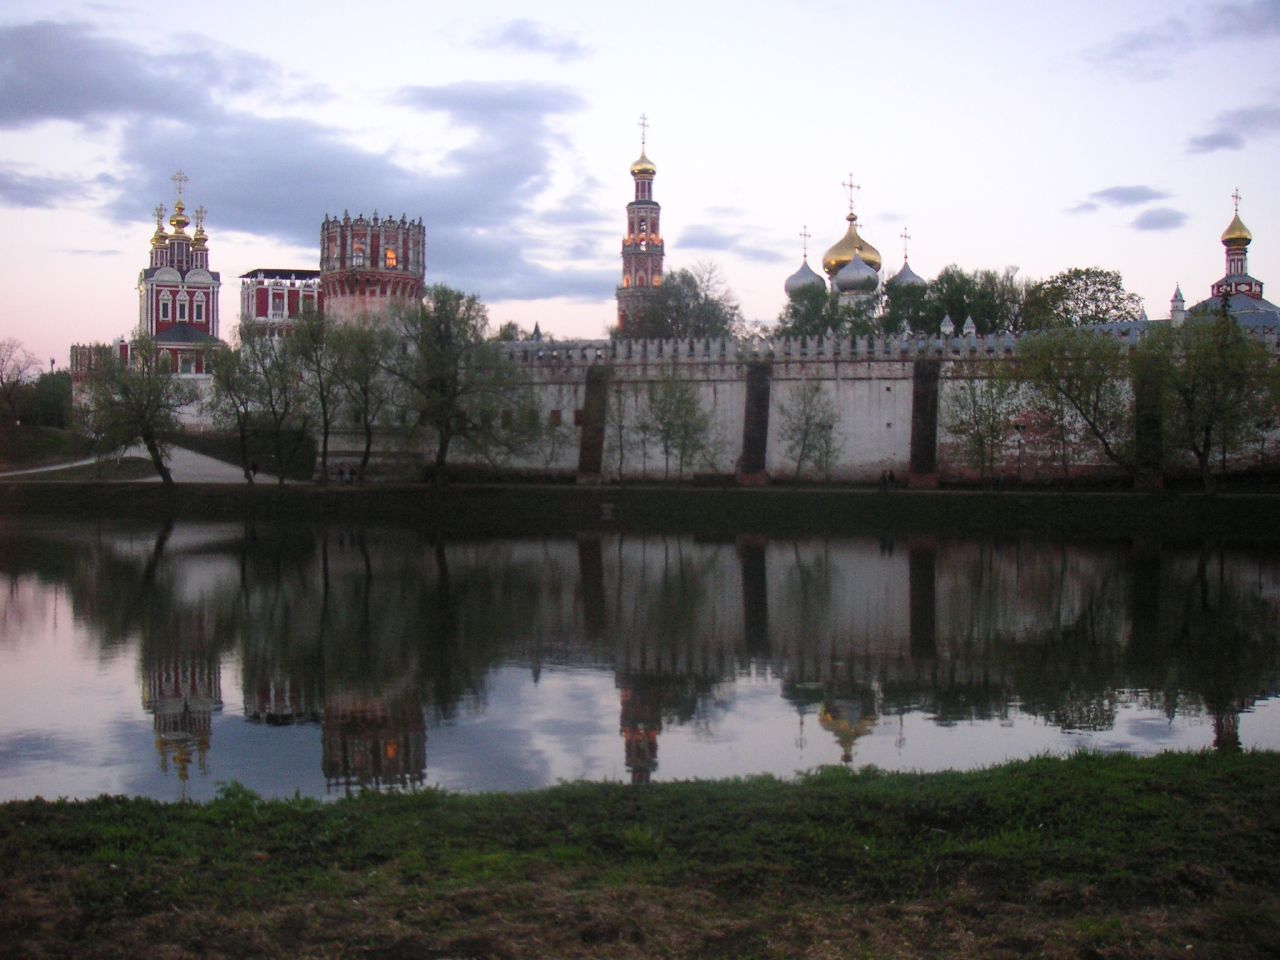 a river is shown with buildings in the background